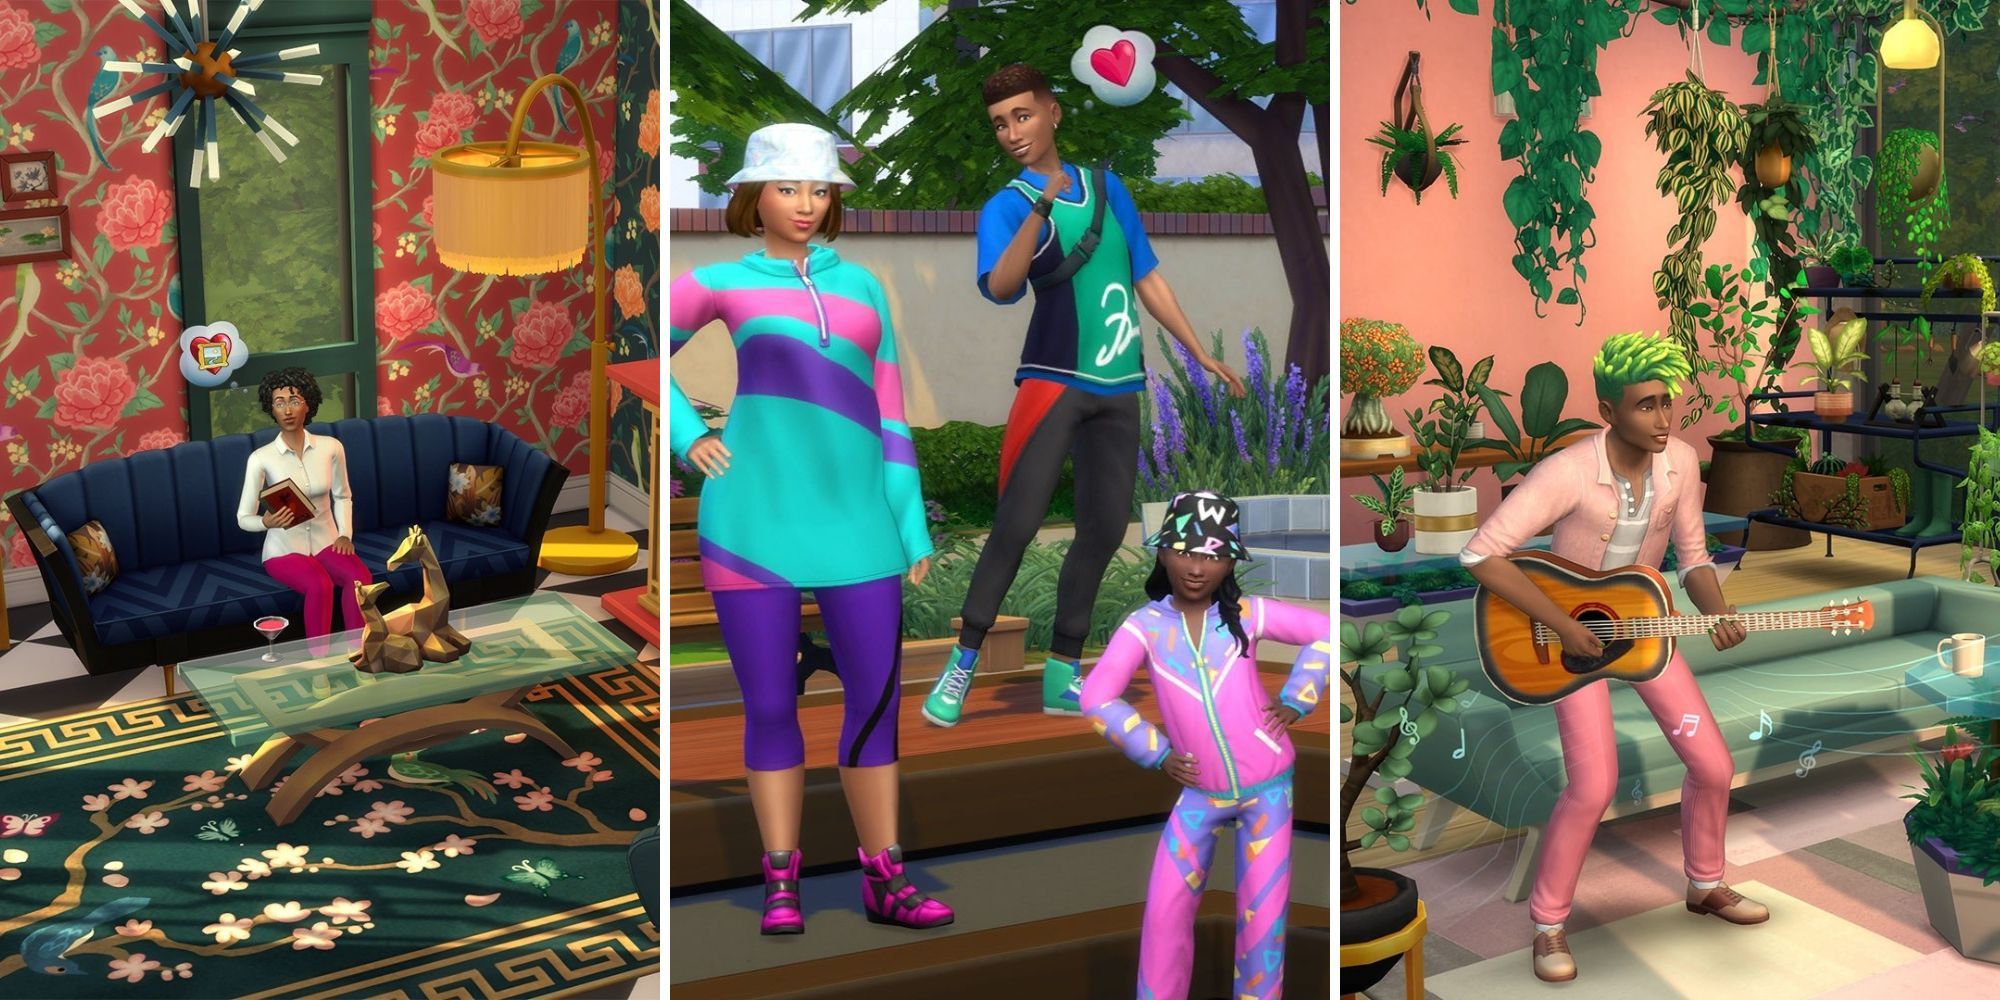 Sims posing in kits for The Sims 4